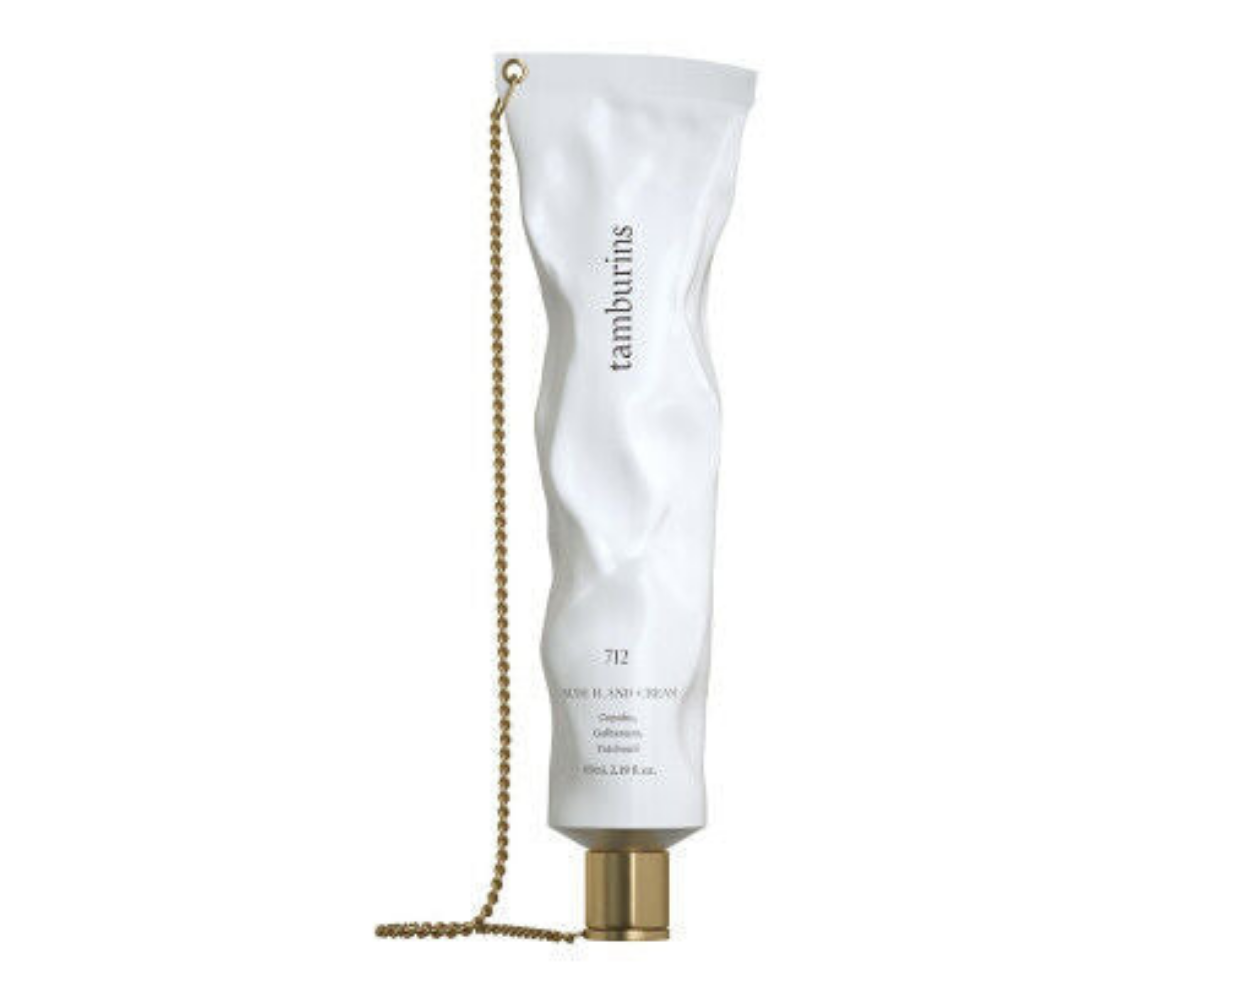 Chic TAMBURINS Chain Hand Cream packaging featuring a gold chain on the tube.